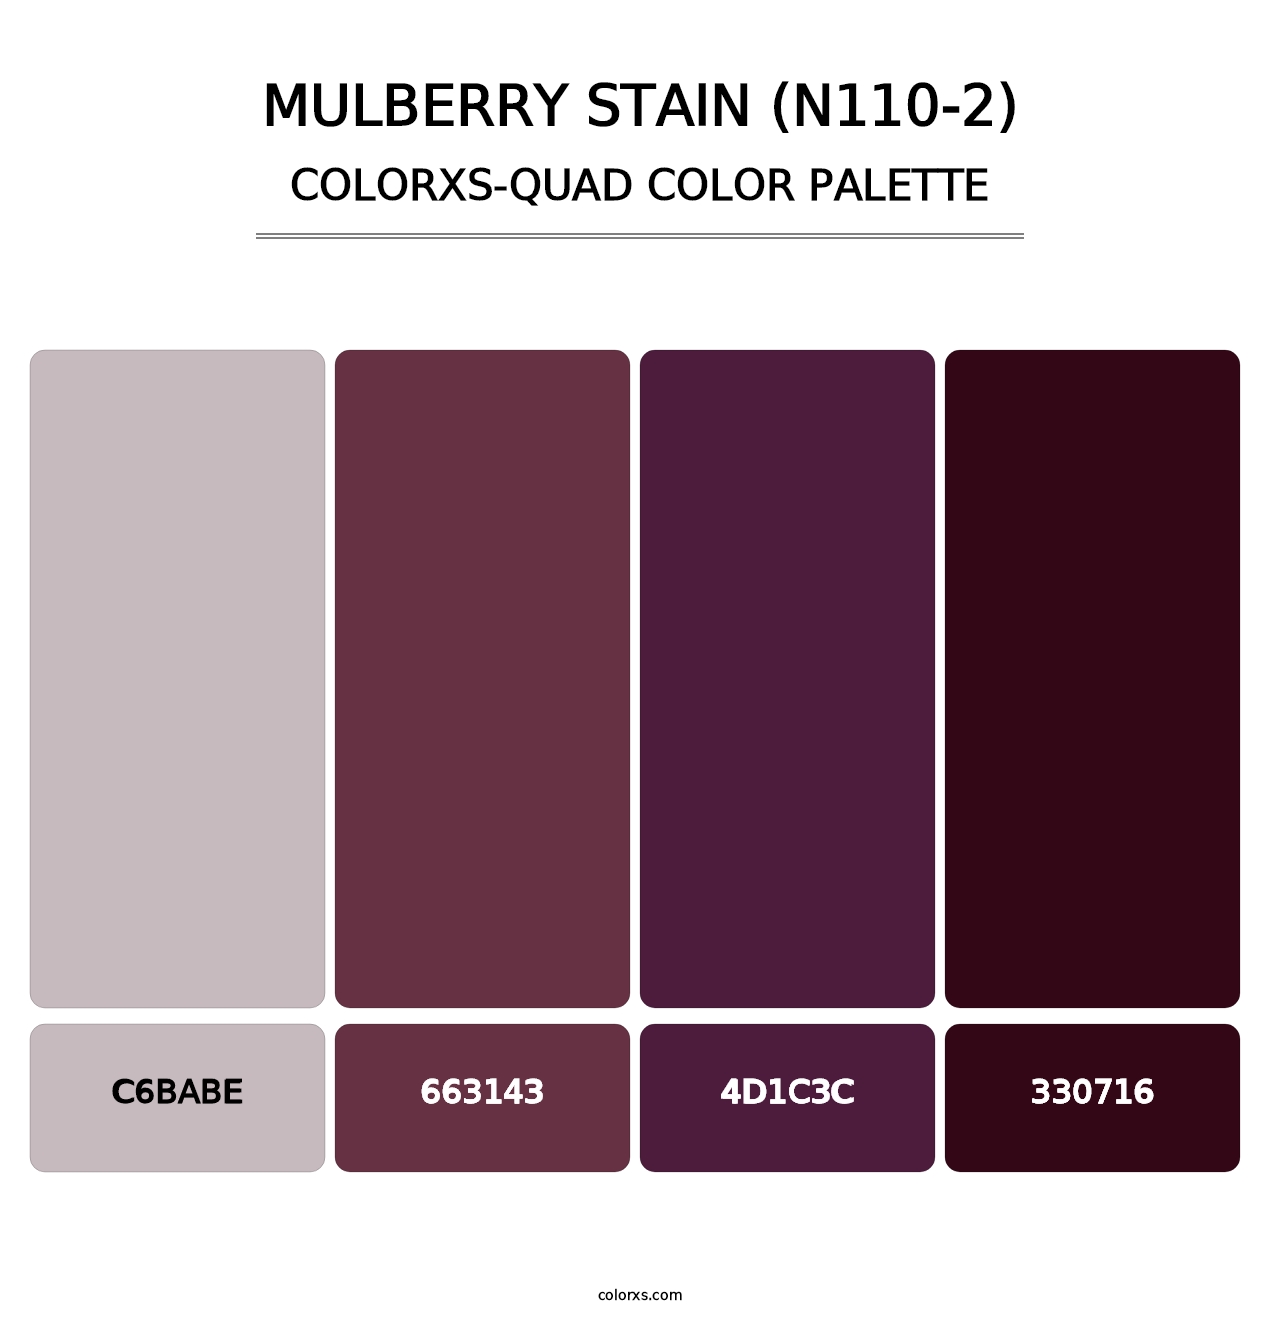 Mulberry Stain (N110-2) - Colorxs Quad Palette